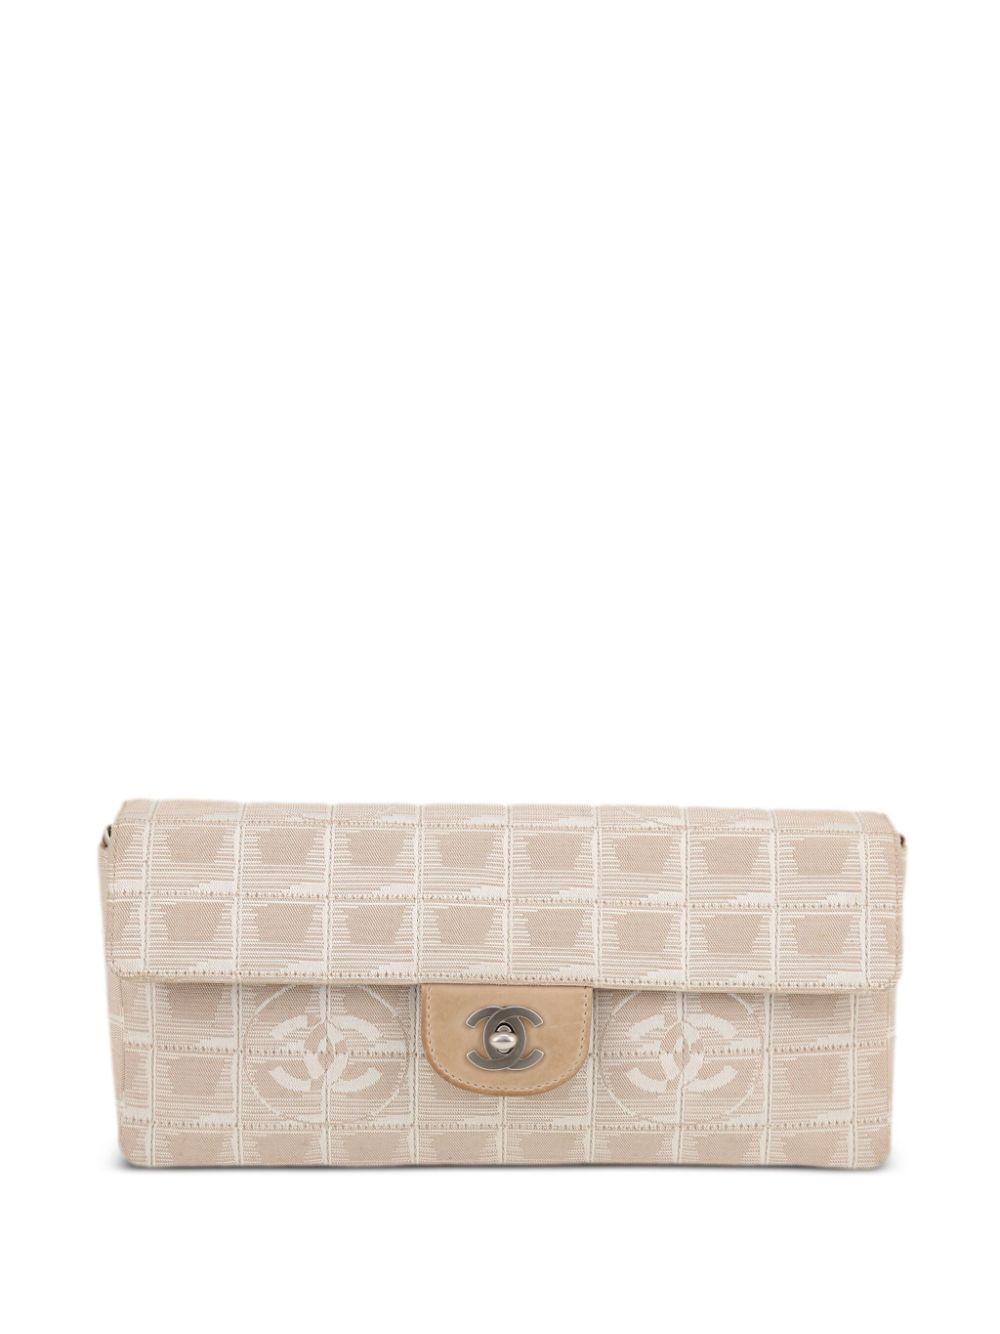 Pre-owned Chanel 2003 Travel Choco Bar Shoulder Bag In Neutrals